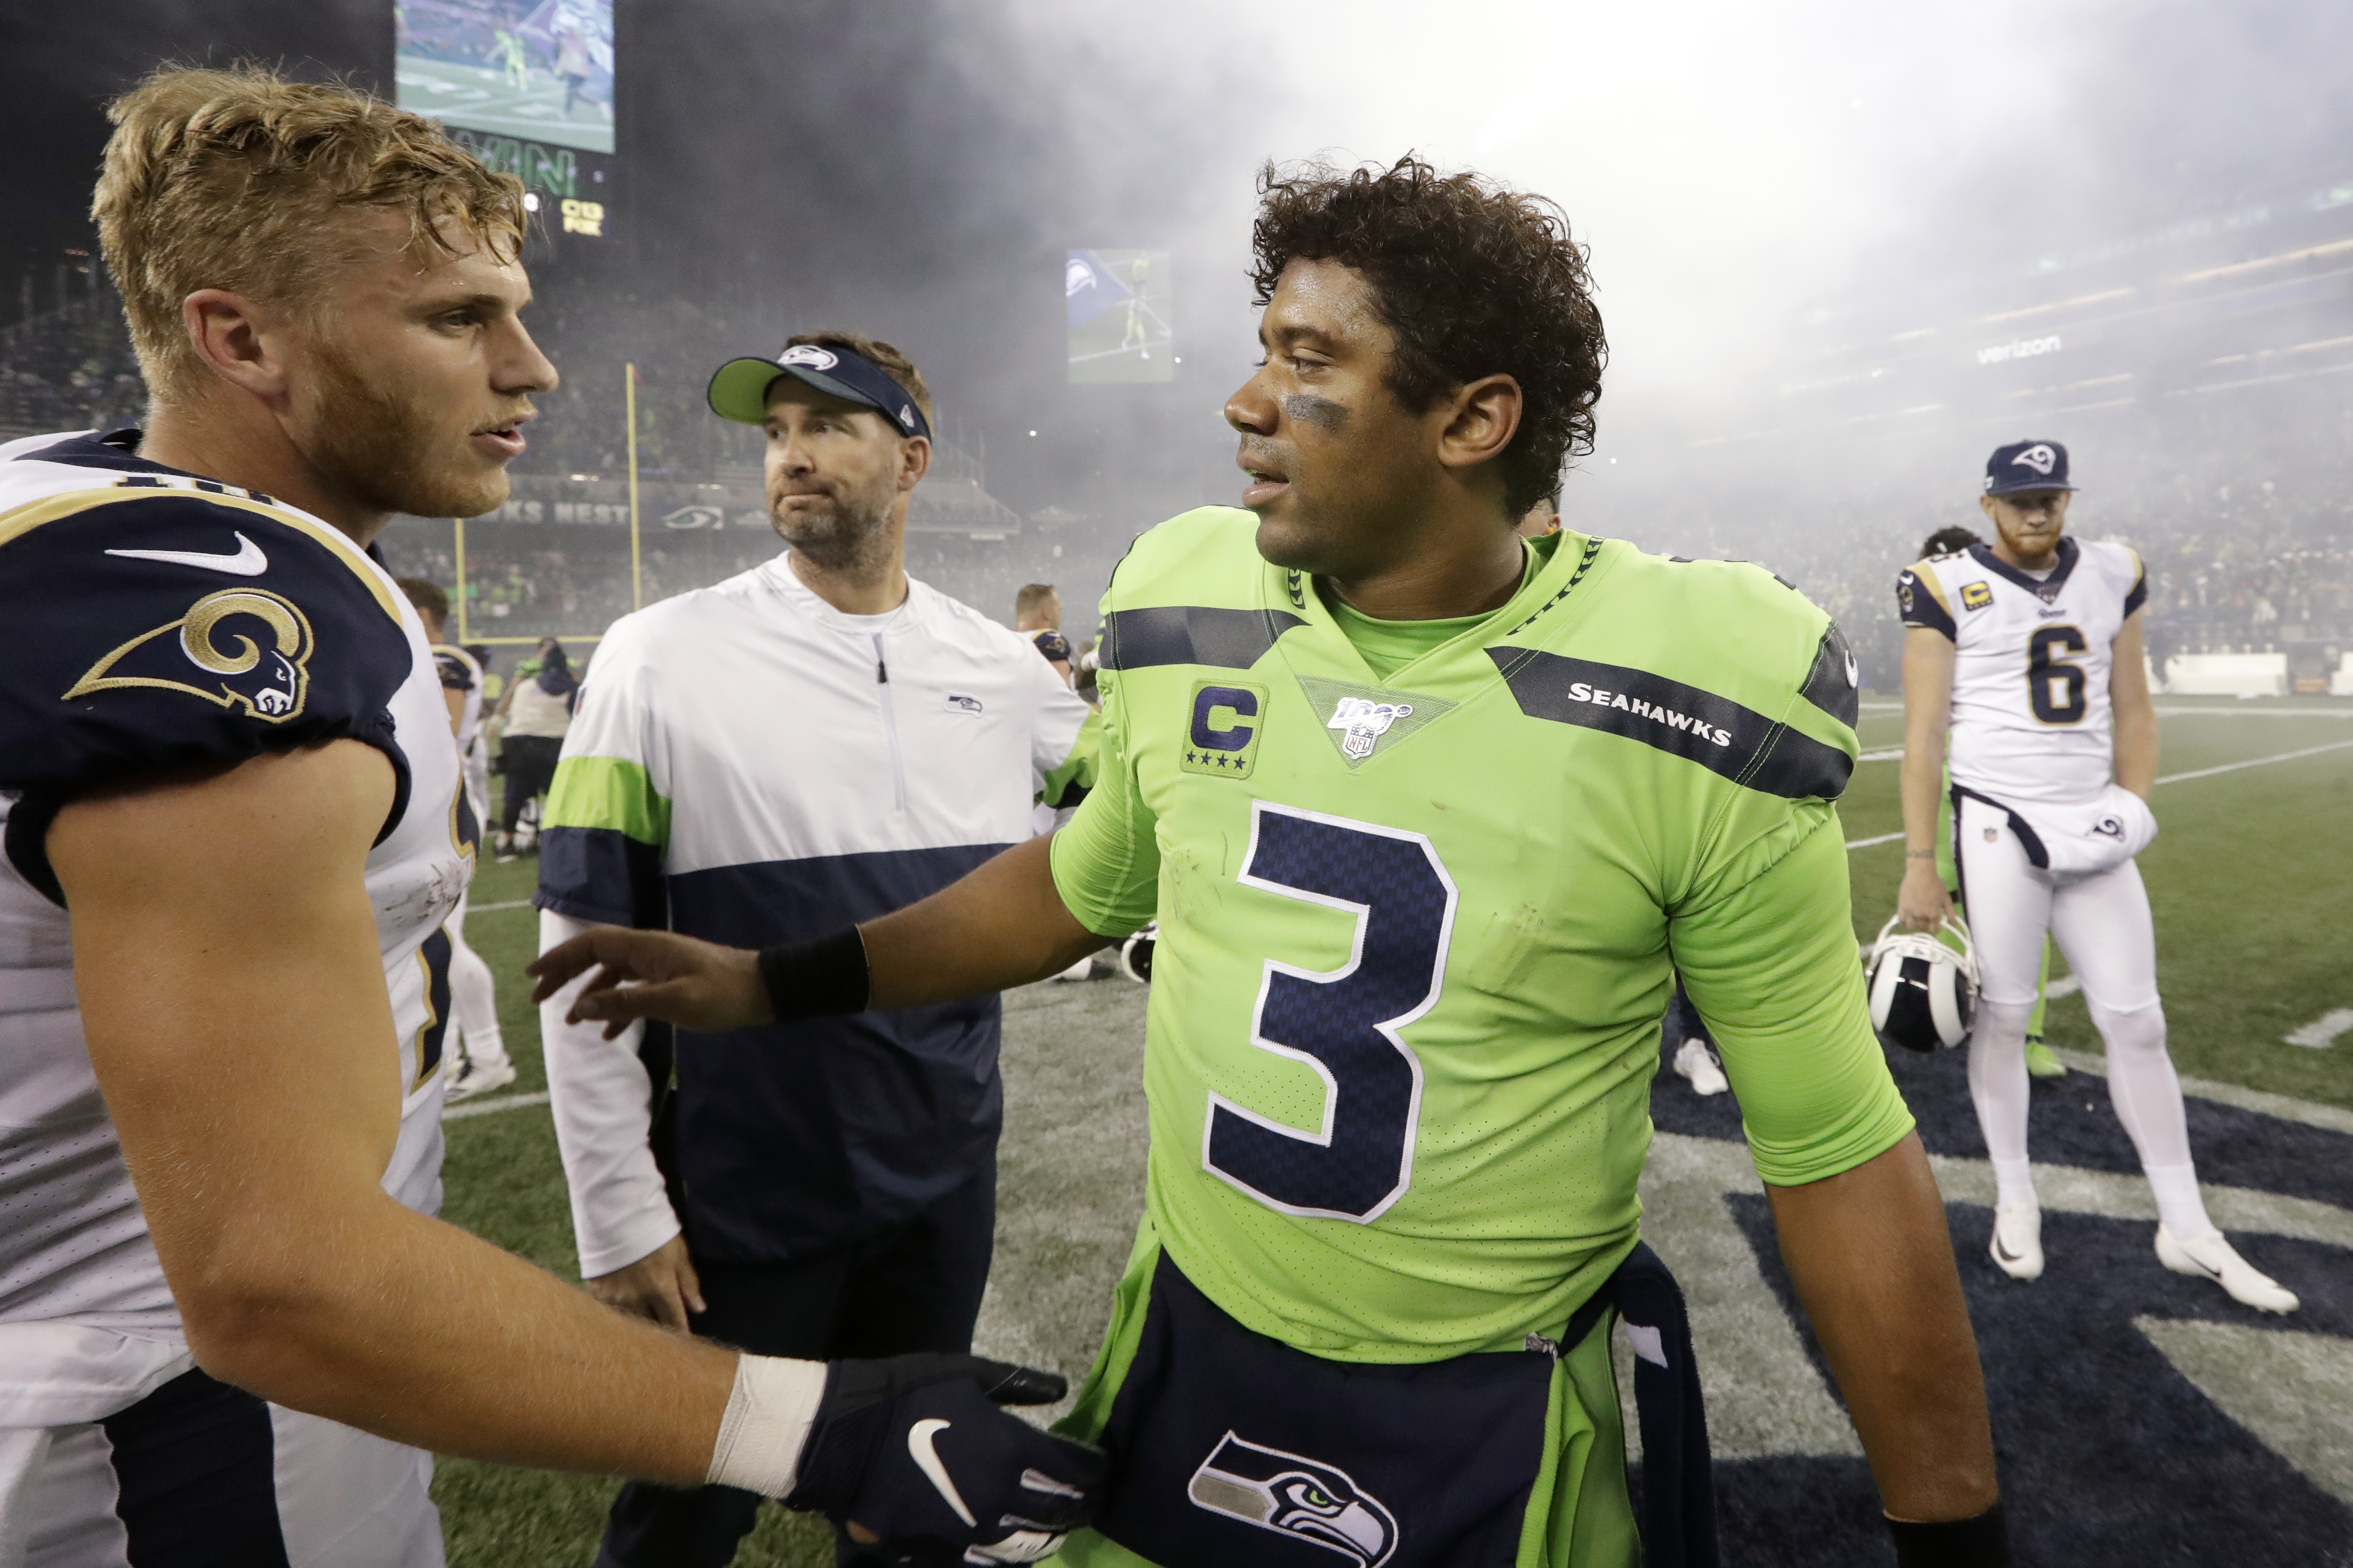 With Wilson playing this well Seahawks can hide their flaws